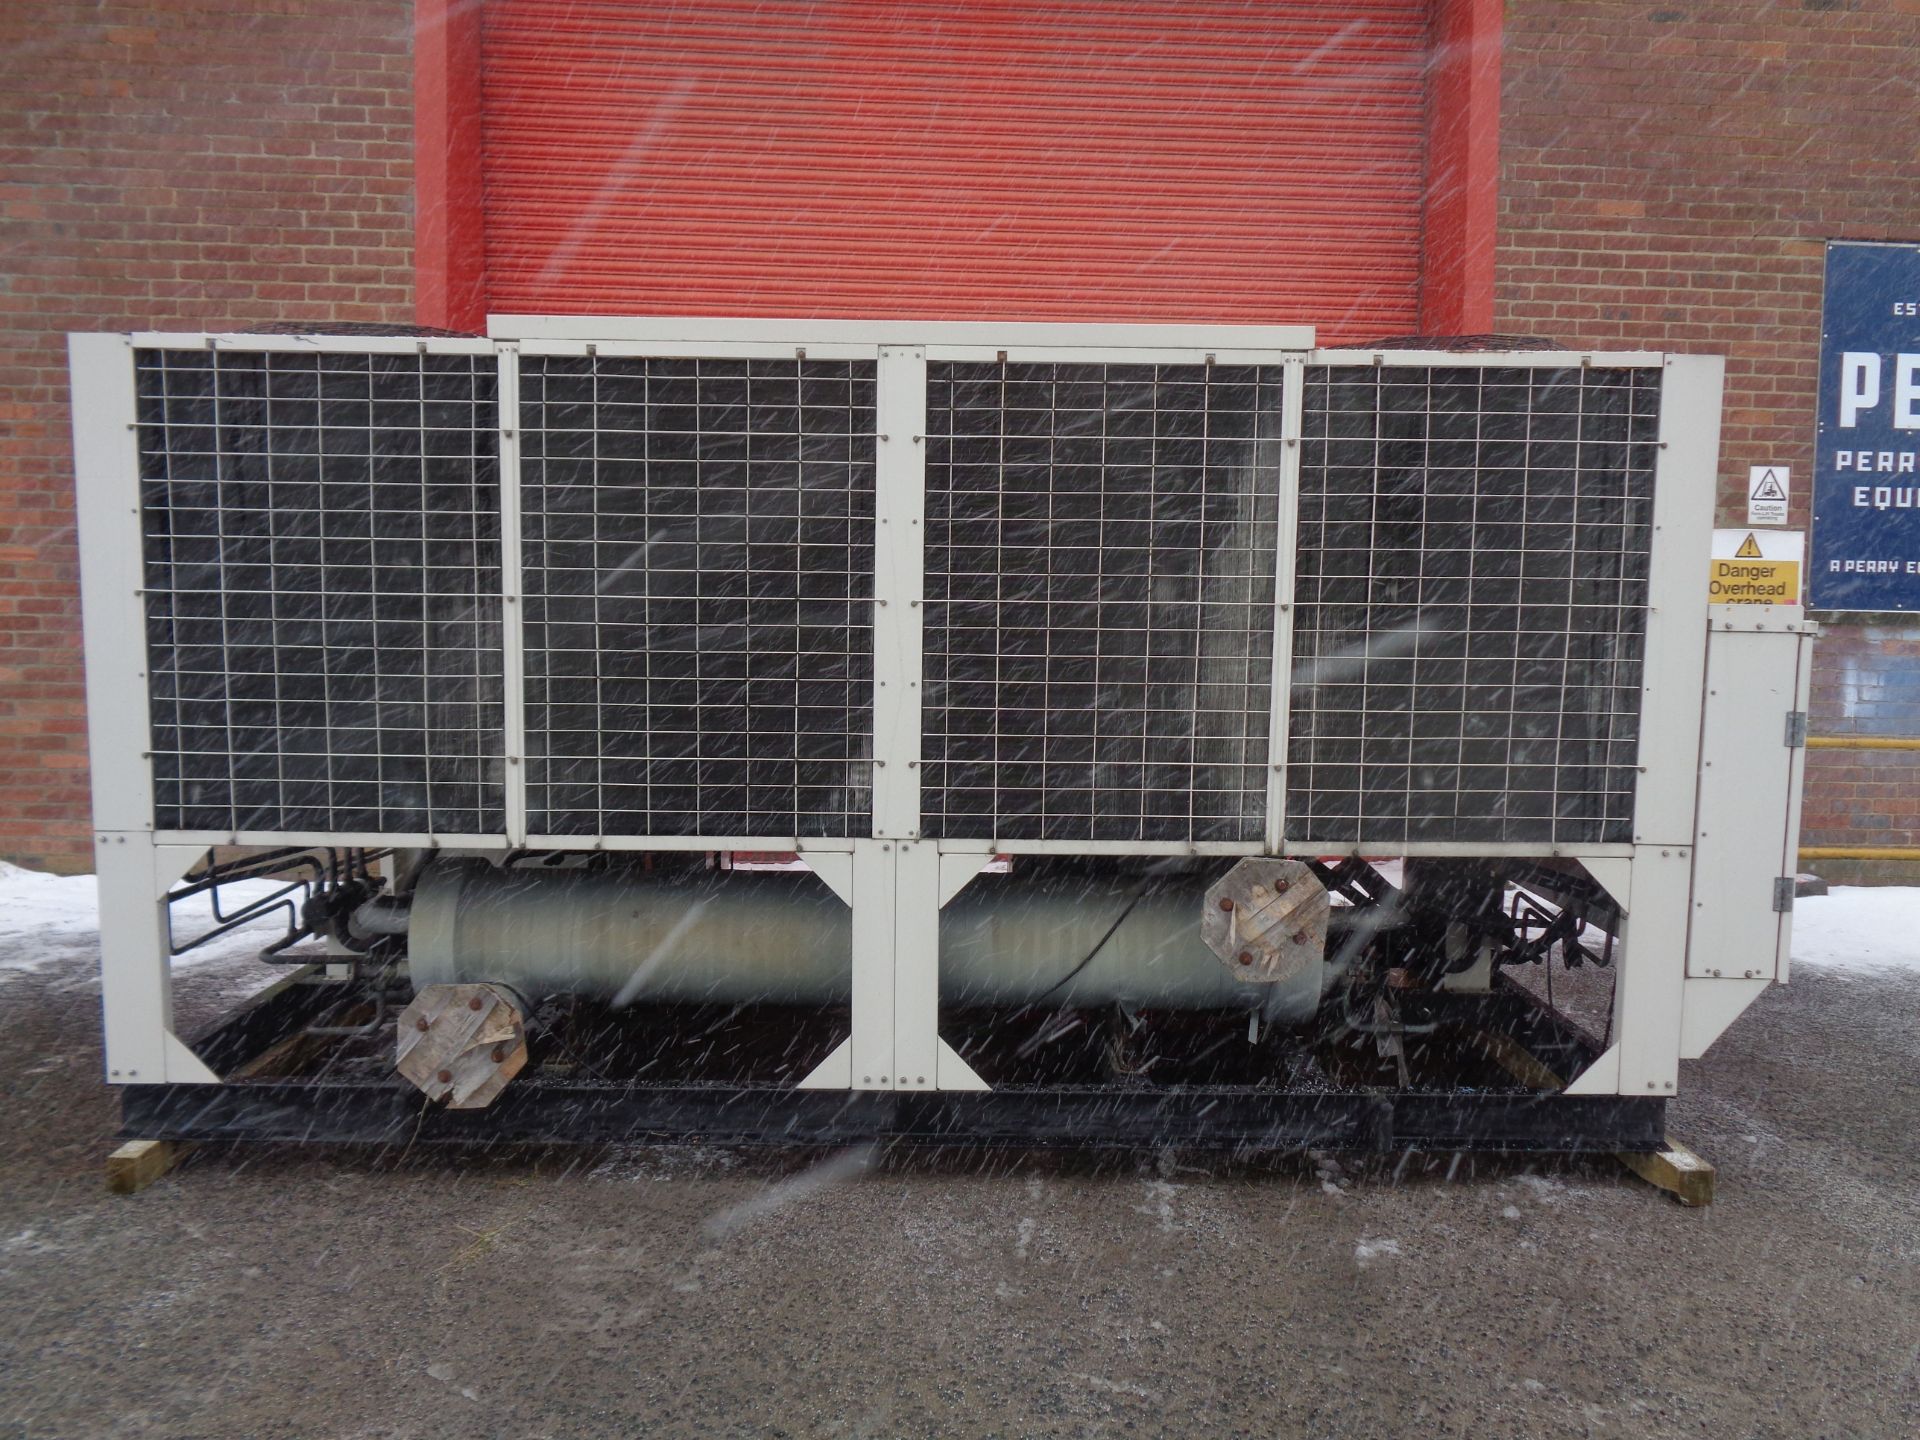 Hitachi ""H Series"" air cooled chiller model RCUG 150AHYZ1. 103 tons. New 2011. Chiller utilizes - Image 9 of 9